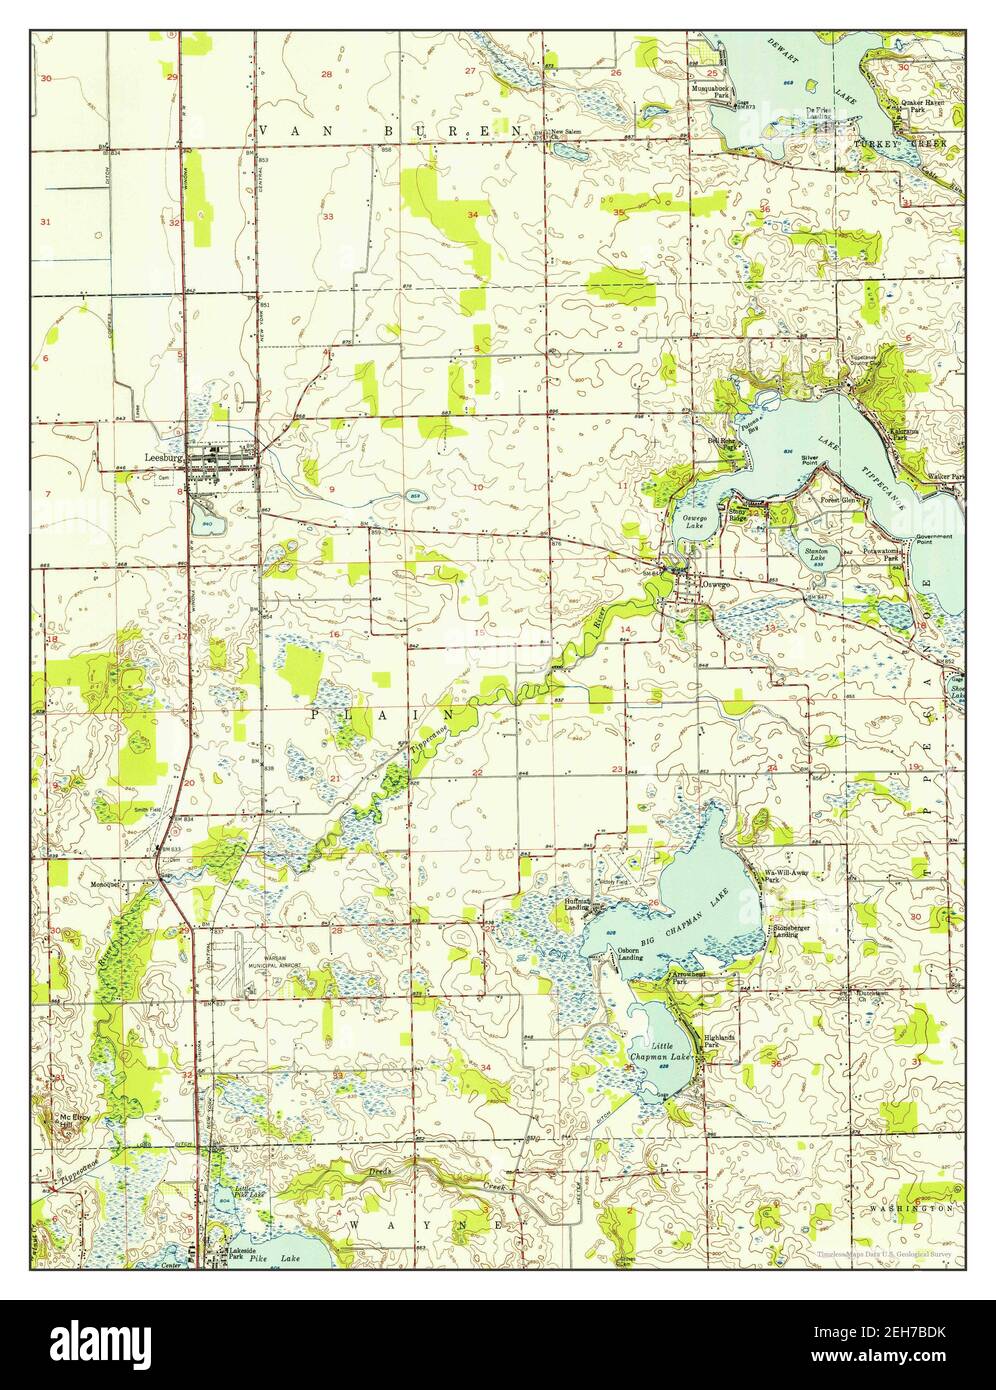 Leesburg, Indiana, map 1950, 1:24000, United States of America by Timeless Maps, data U.S. Geological Survey Stock Photo